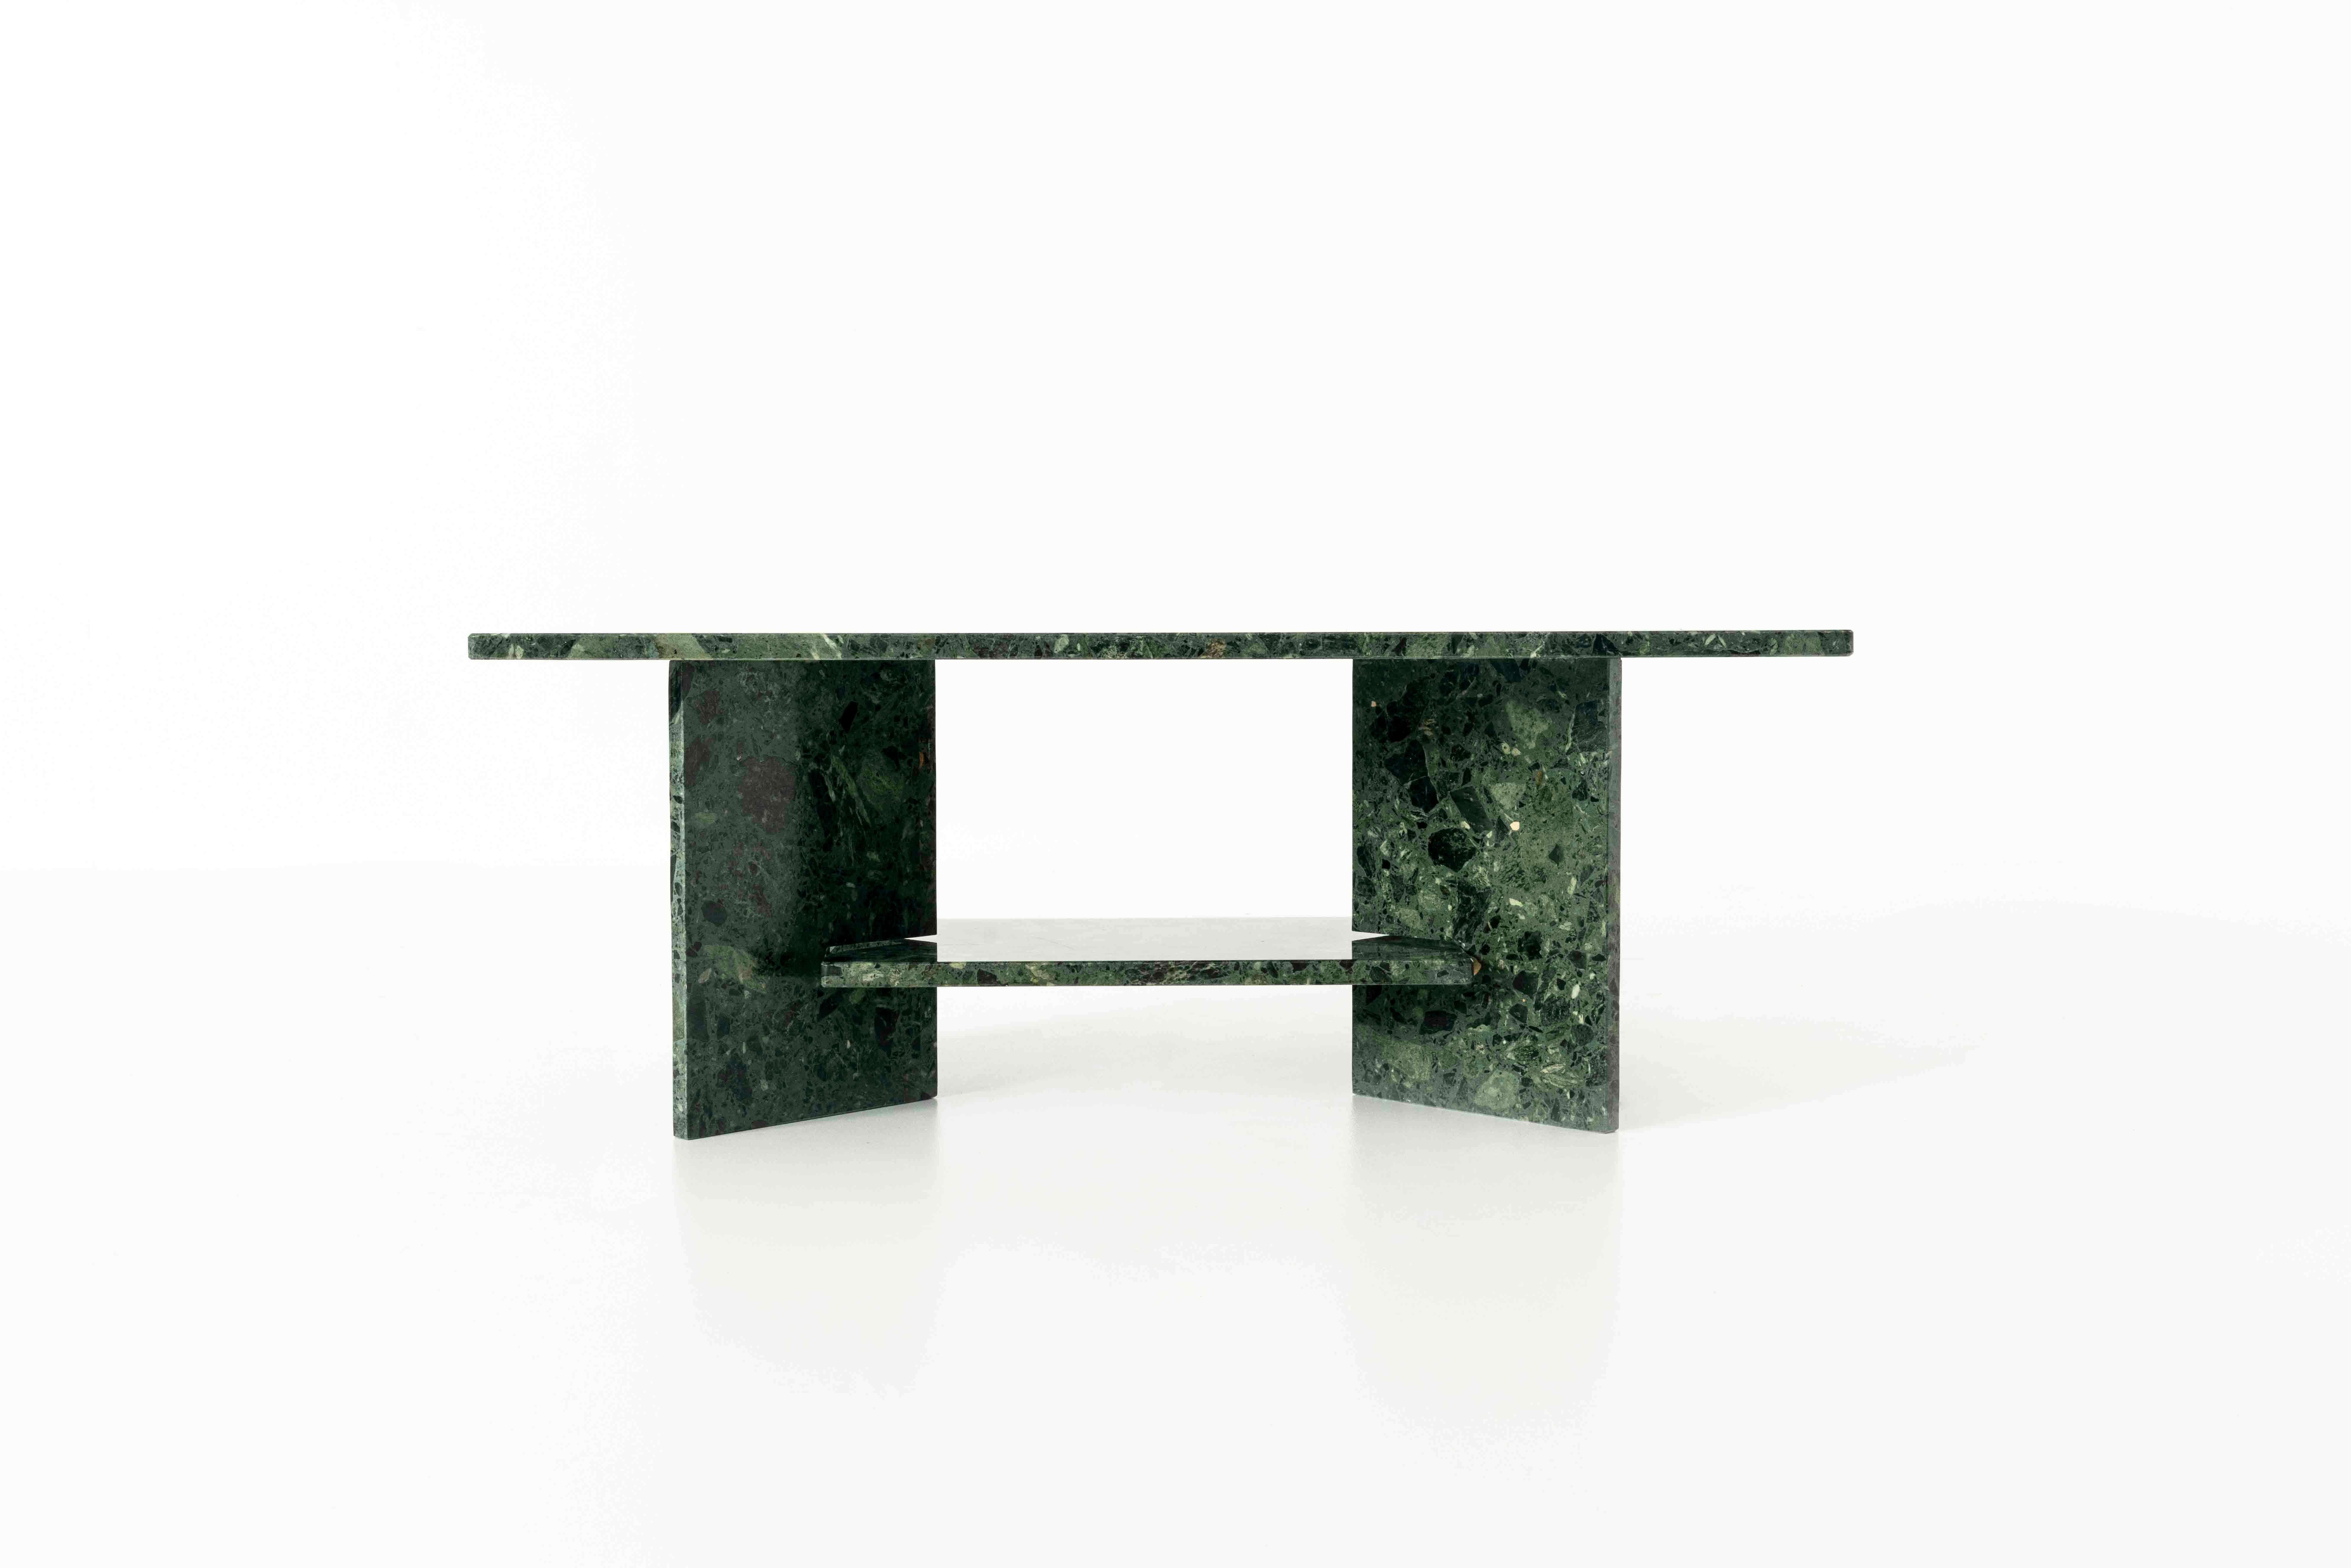 Stunning green marble coffee table. The table consists of four elements that can be fitted together. The two triangular legs hold the lower table top and the full tabletop is put on top of the table. The design is clean and the marble has an amazing